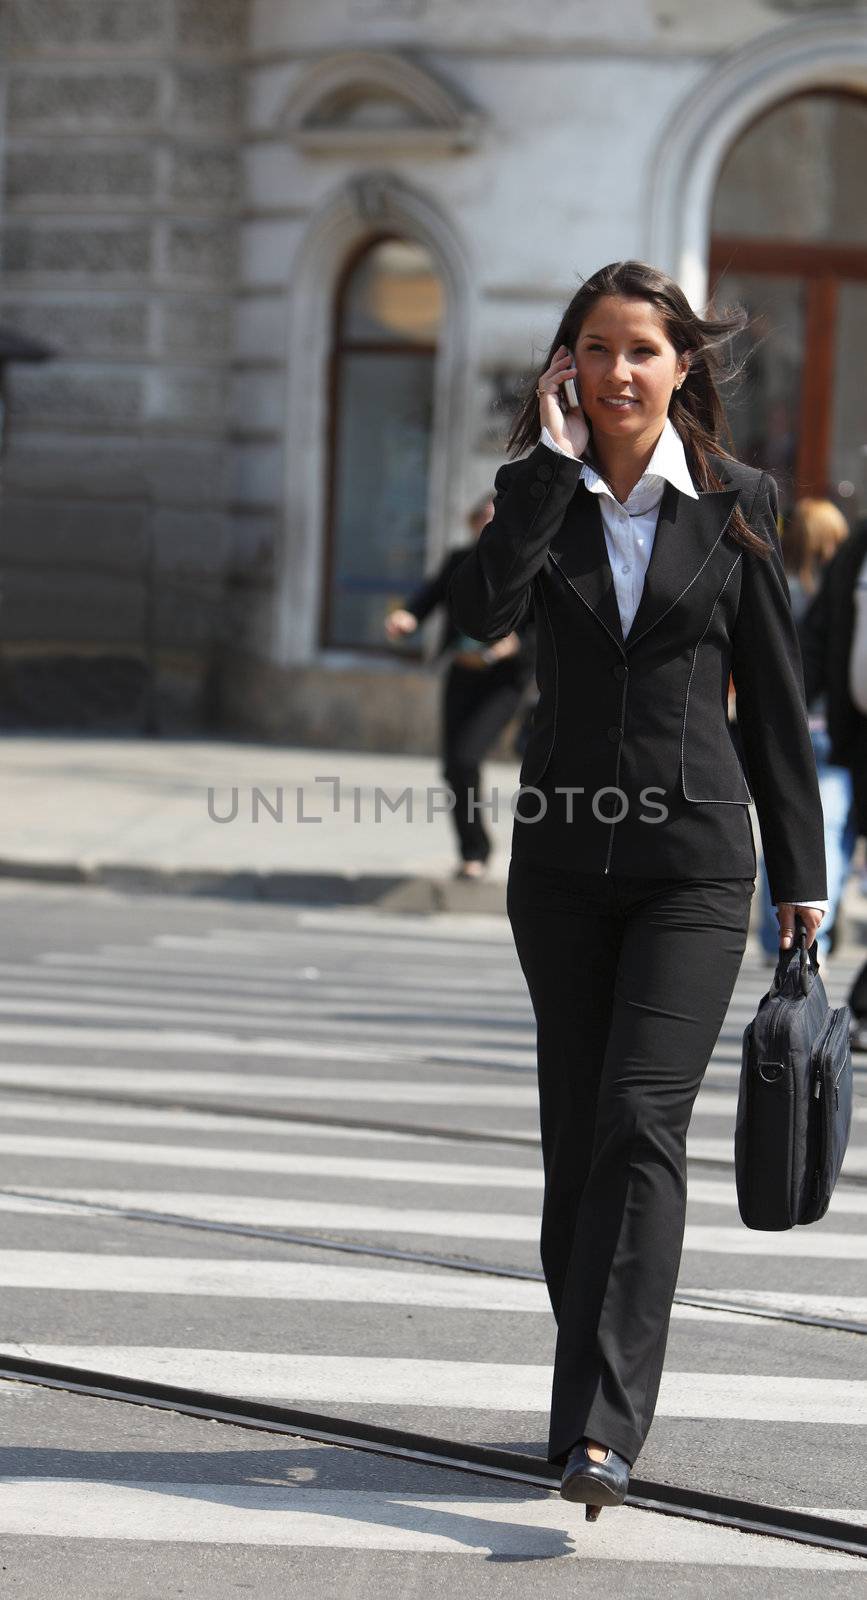 Businesswoman in the city by RazvanPhotography